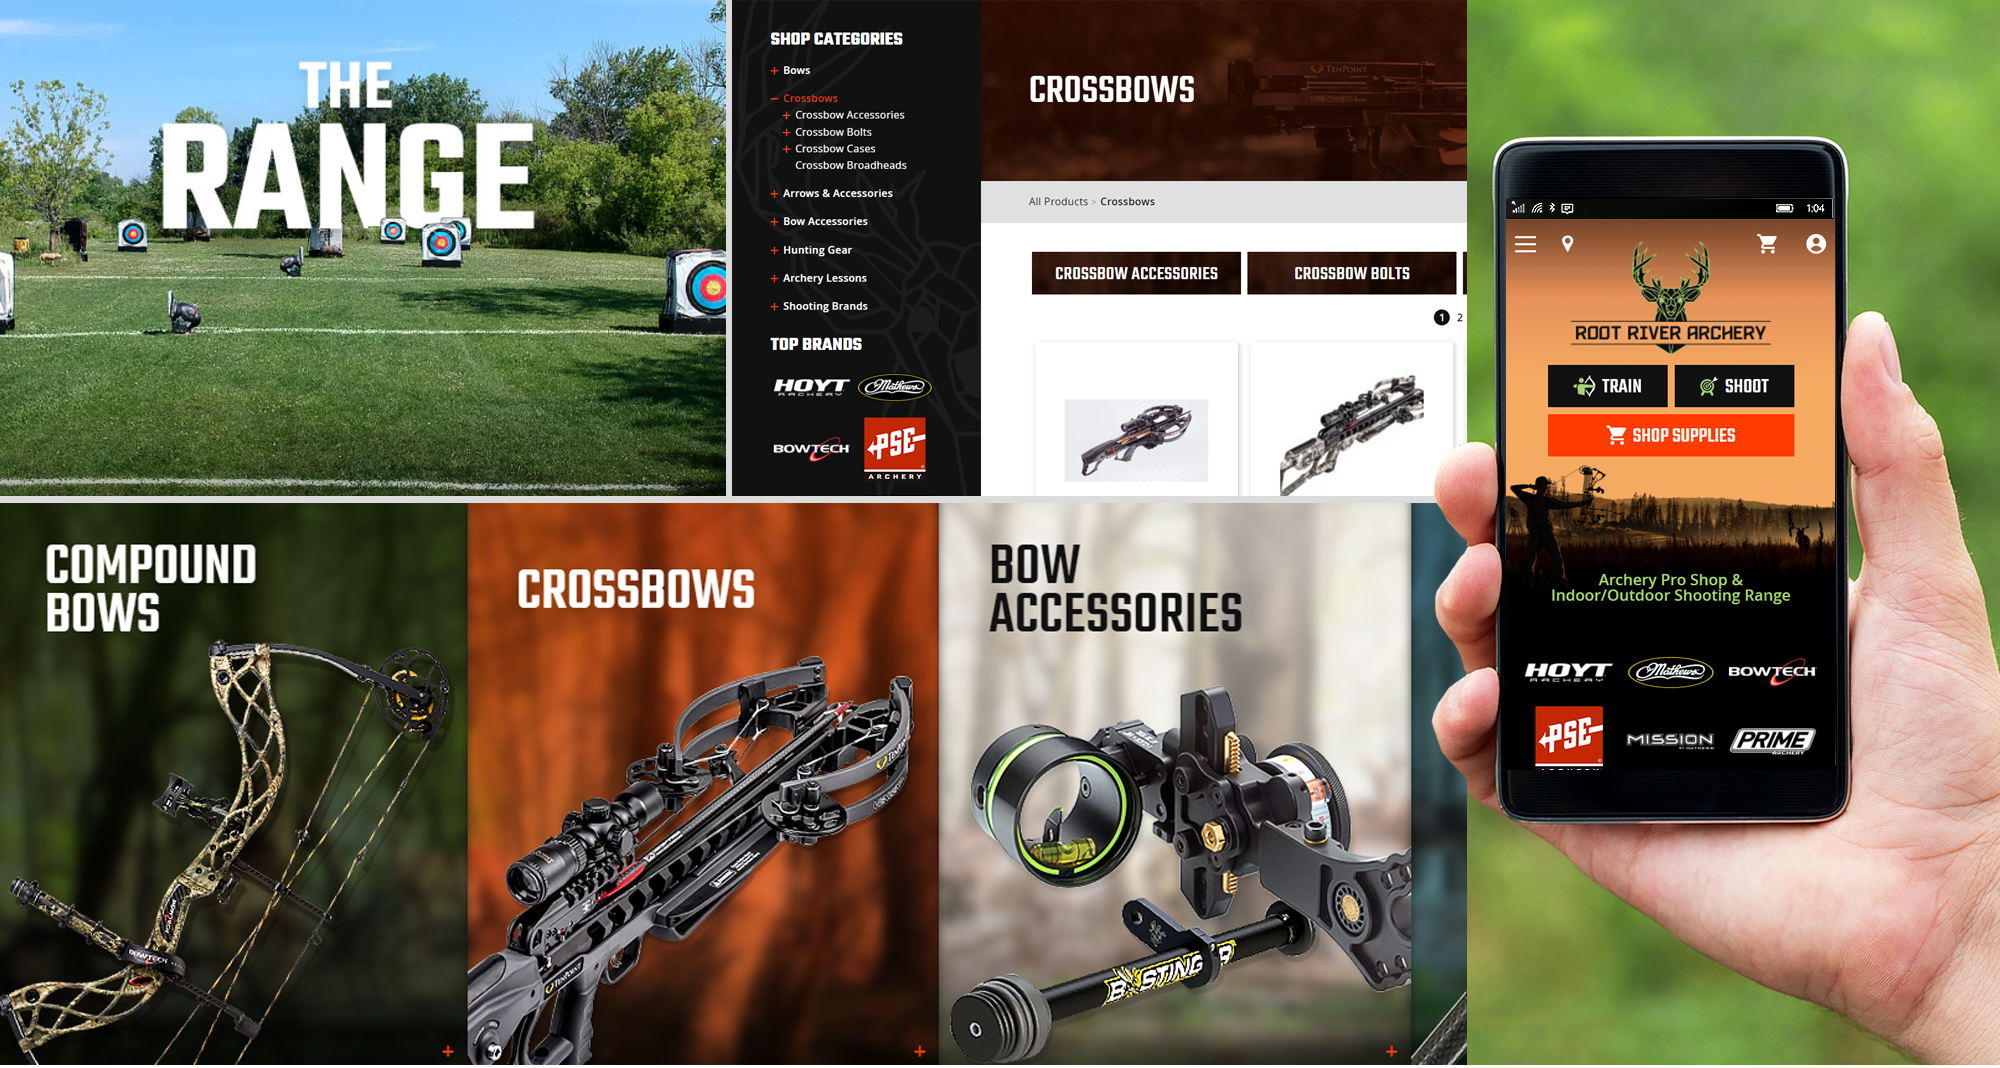 Milwaukee web marketing for Root River Archery